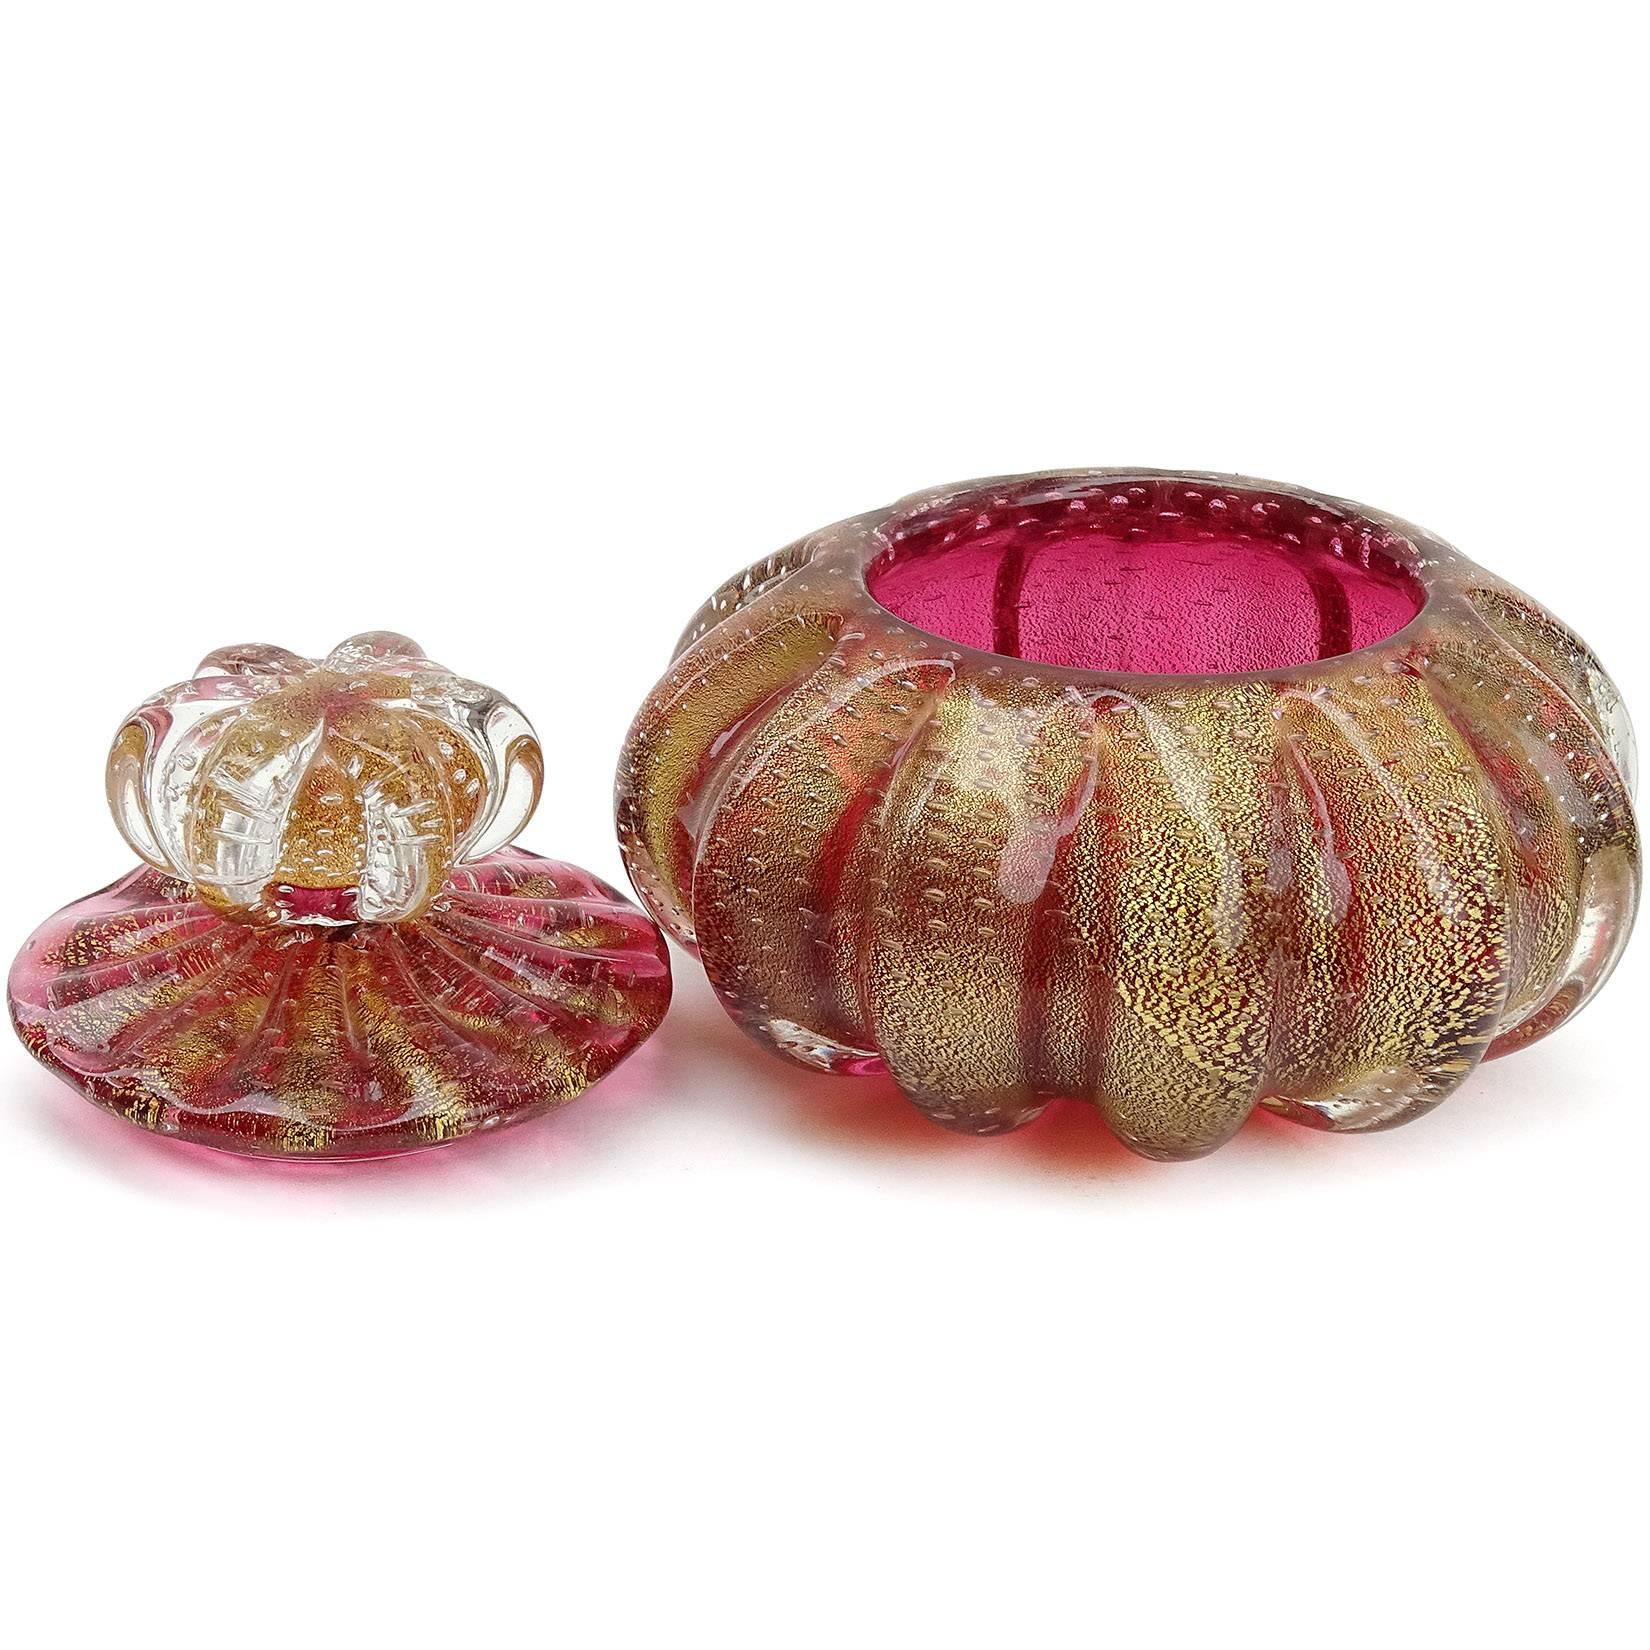 Beautiful vintage Murano hand blown red amethyst, gold flecks and controlled bubbles art glass powder or jewelry box. Attributed to the Barovier e Toso Company. The lidded jar has a ribbed surface, with tiny bubble 